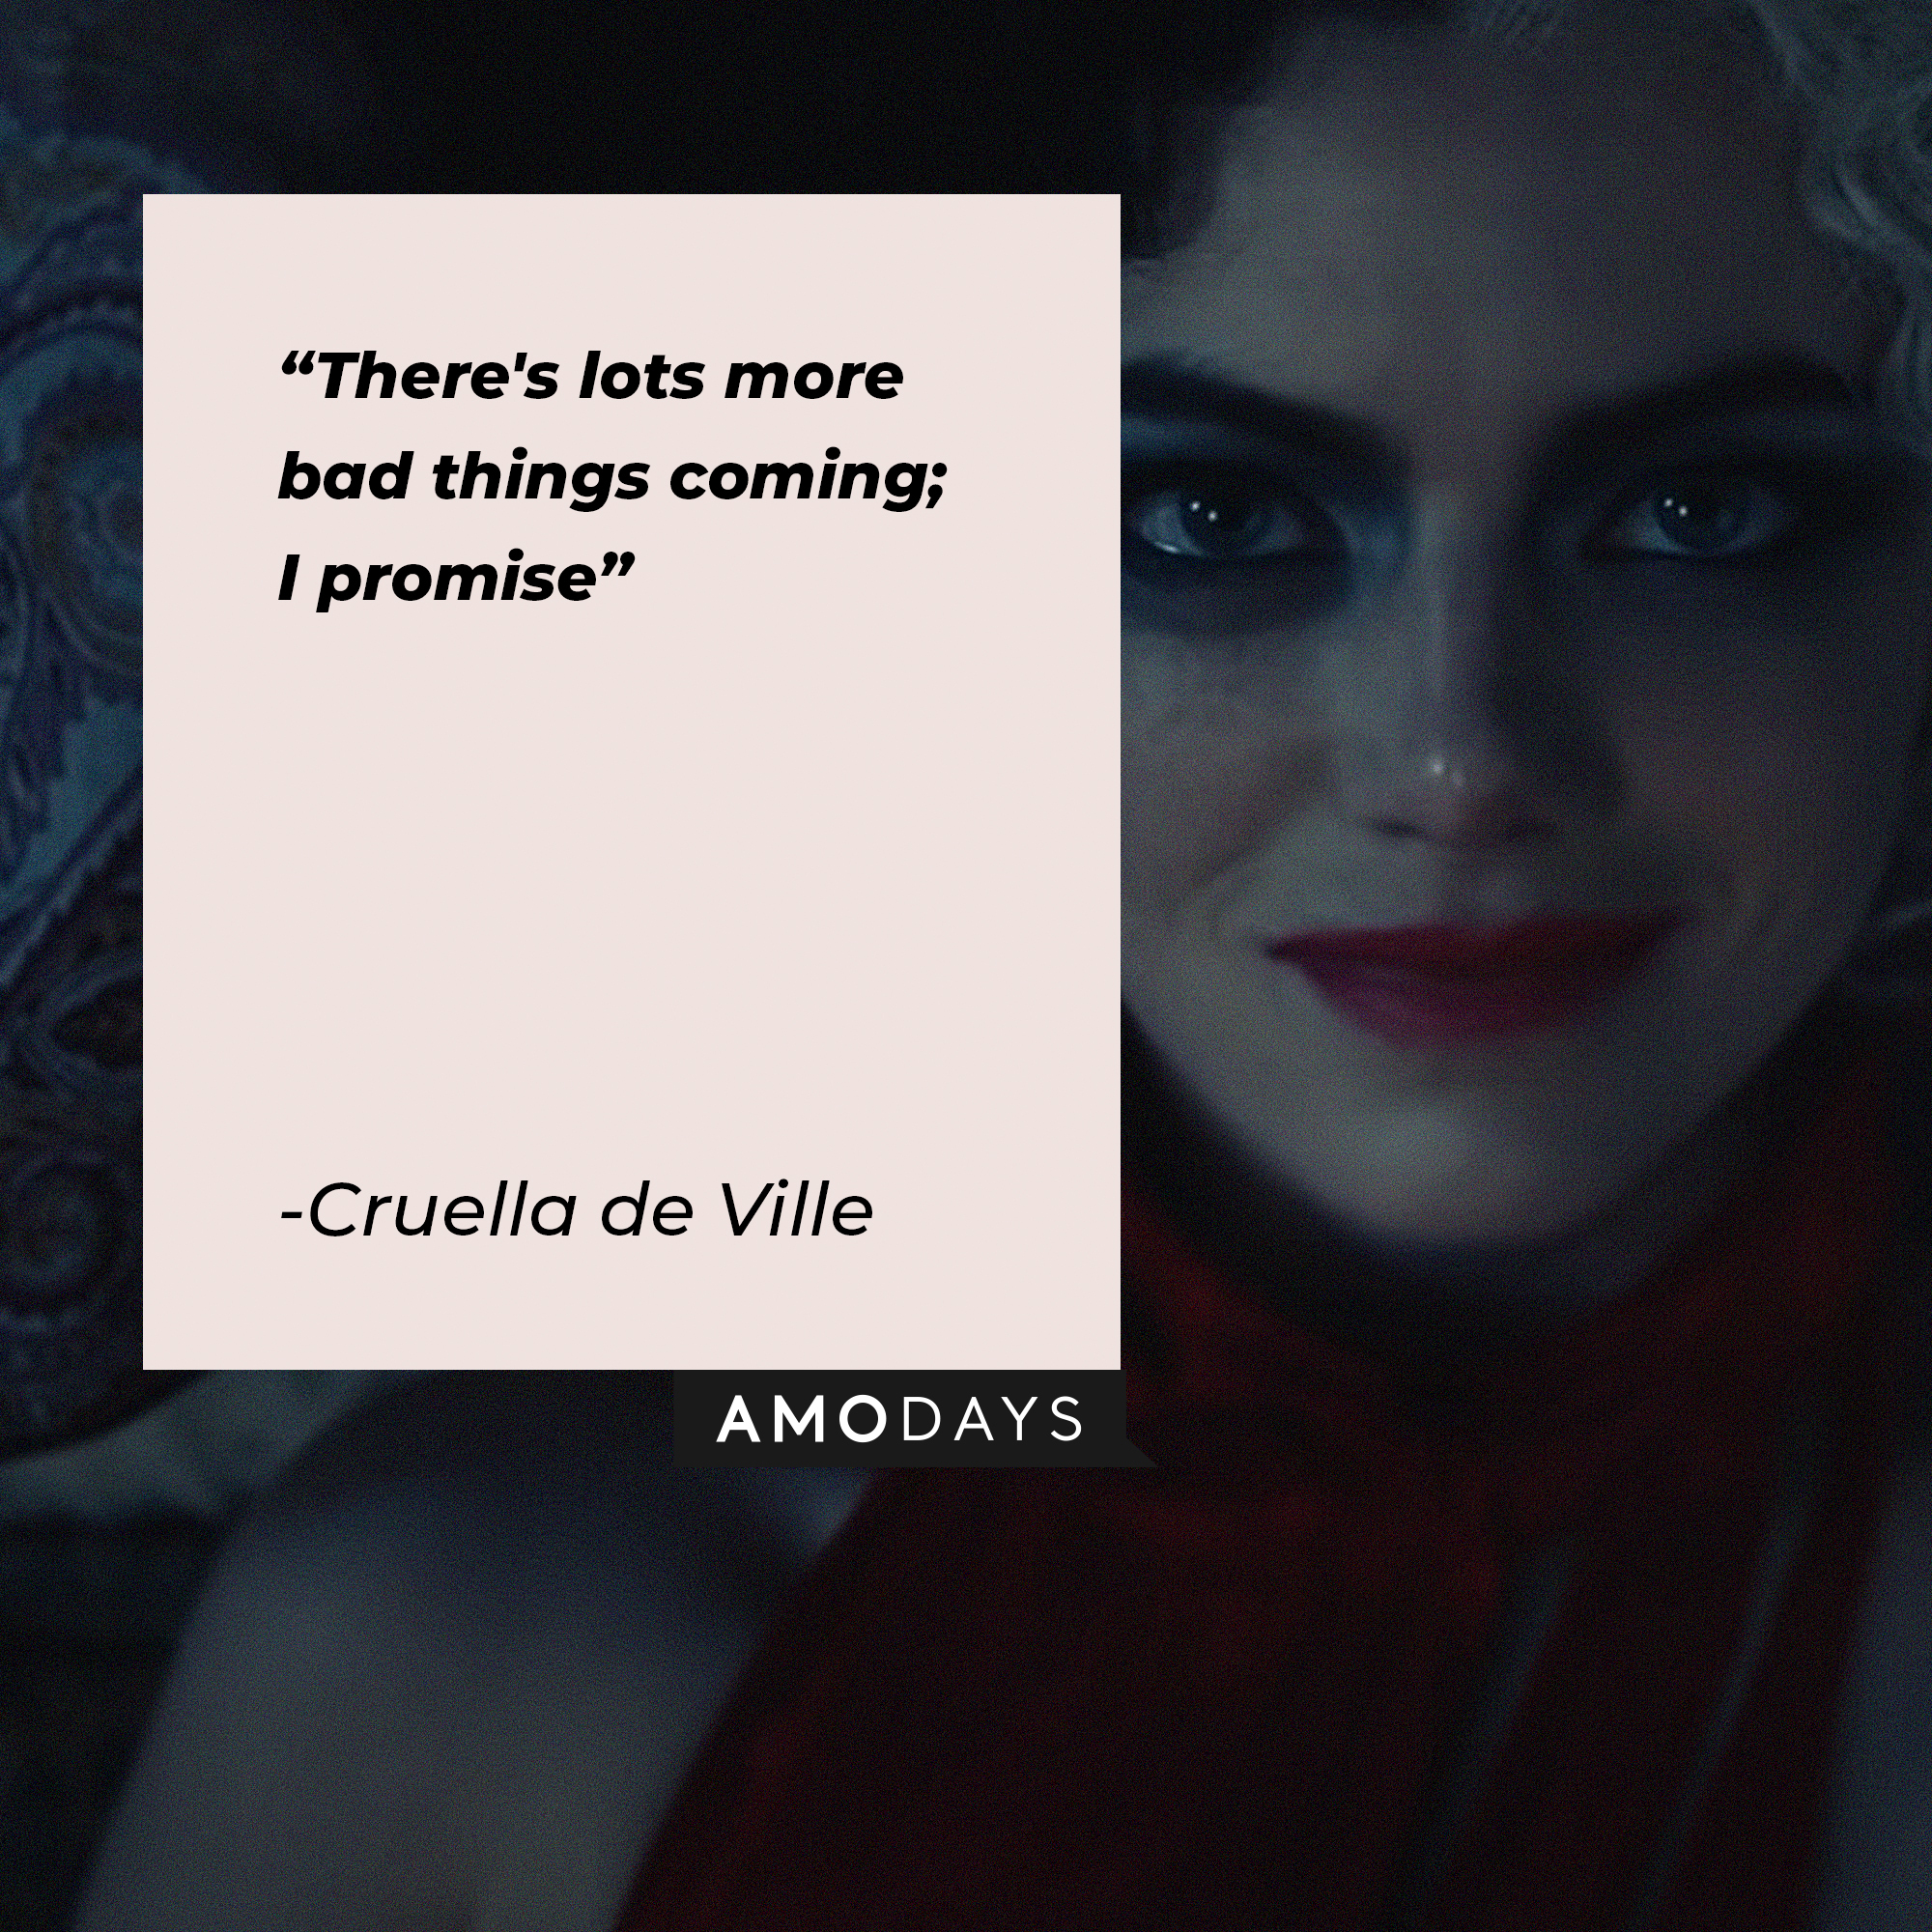 Cruella de Ville’s quote: "Don't worry; we're just getting started. There's lots more bad things coming, I promise." | Image: AmoDays